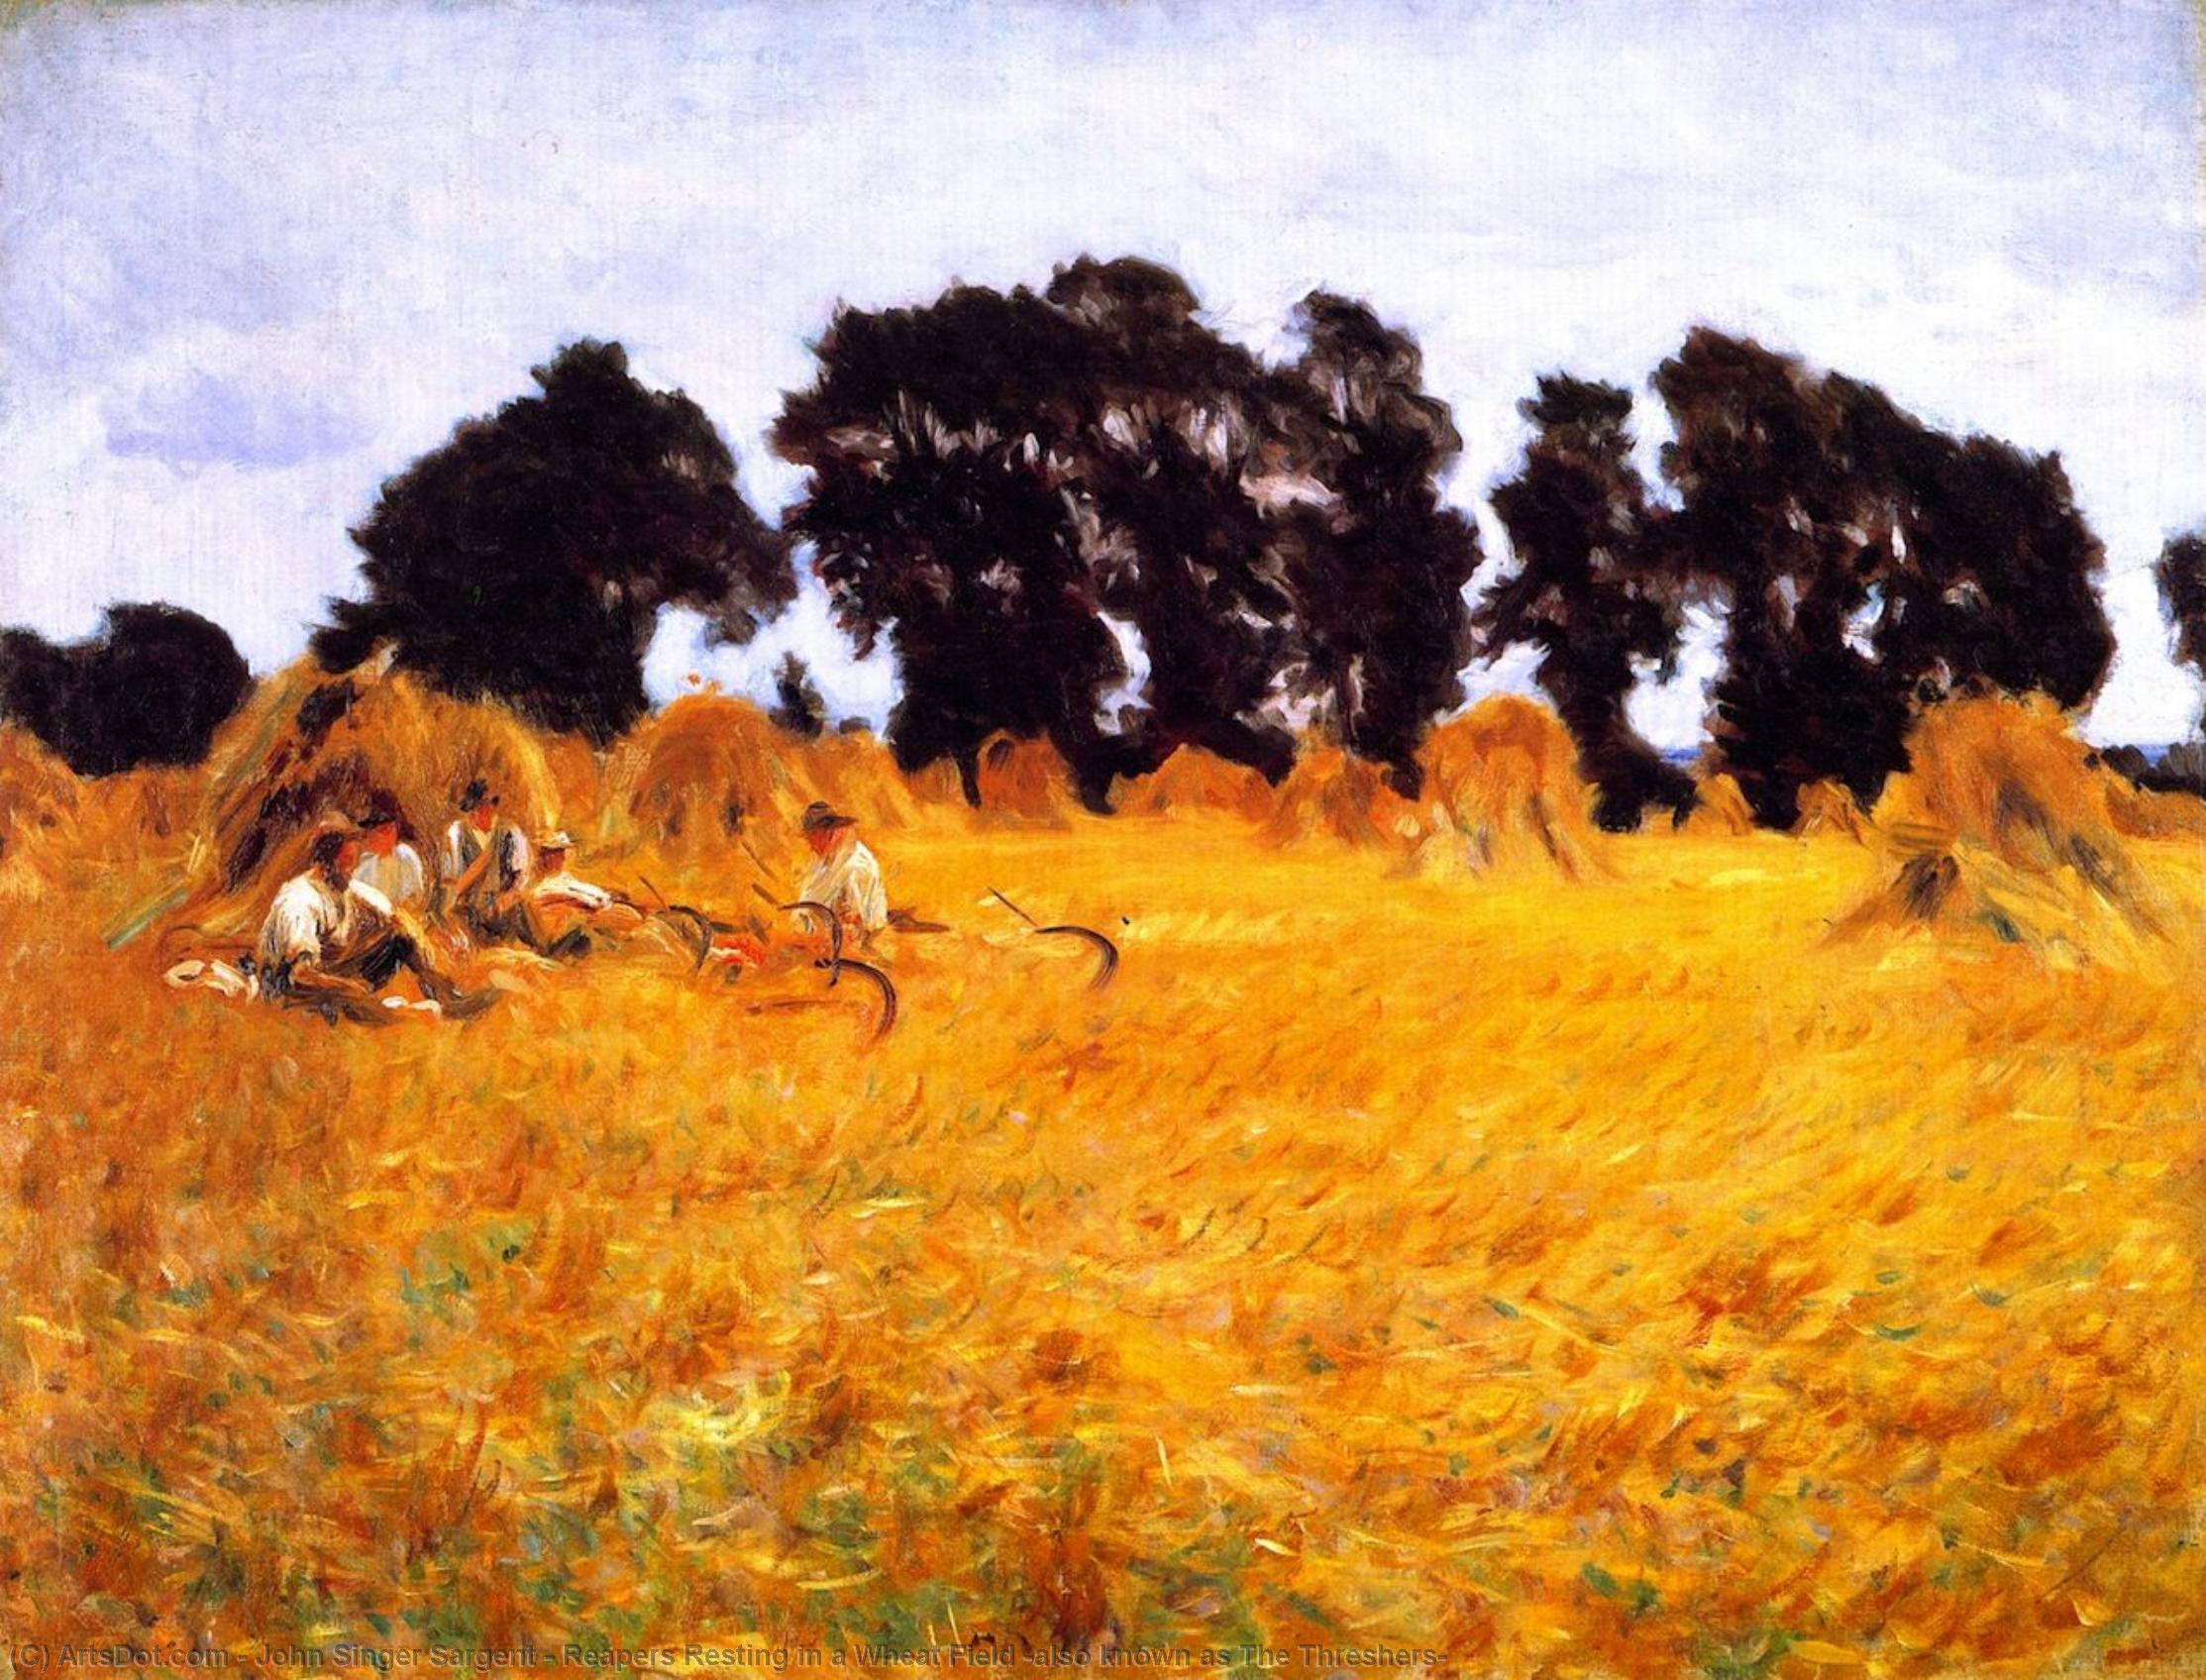 WikiOO.org - Güzel Sanatlar Ansiklopedisi - Resim, Resimler John Singer Sargent - Reapers Resting in a Wheat Field (also known as The Threshers)